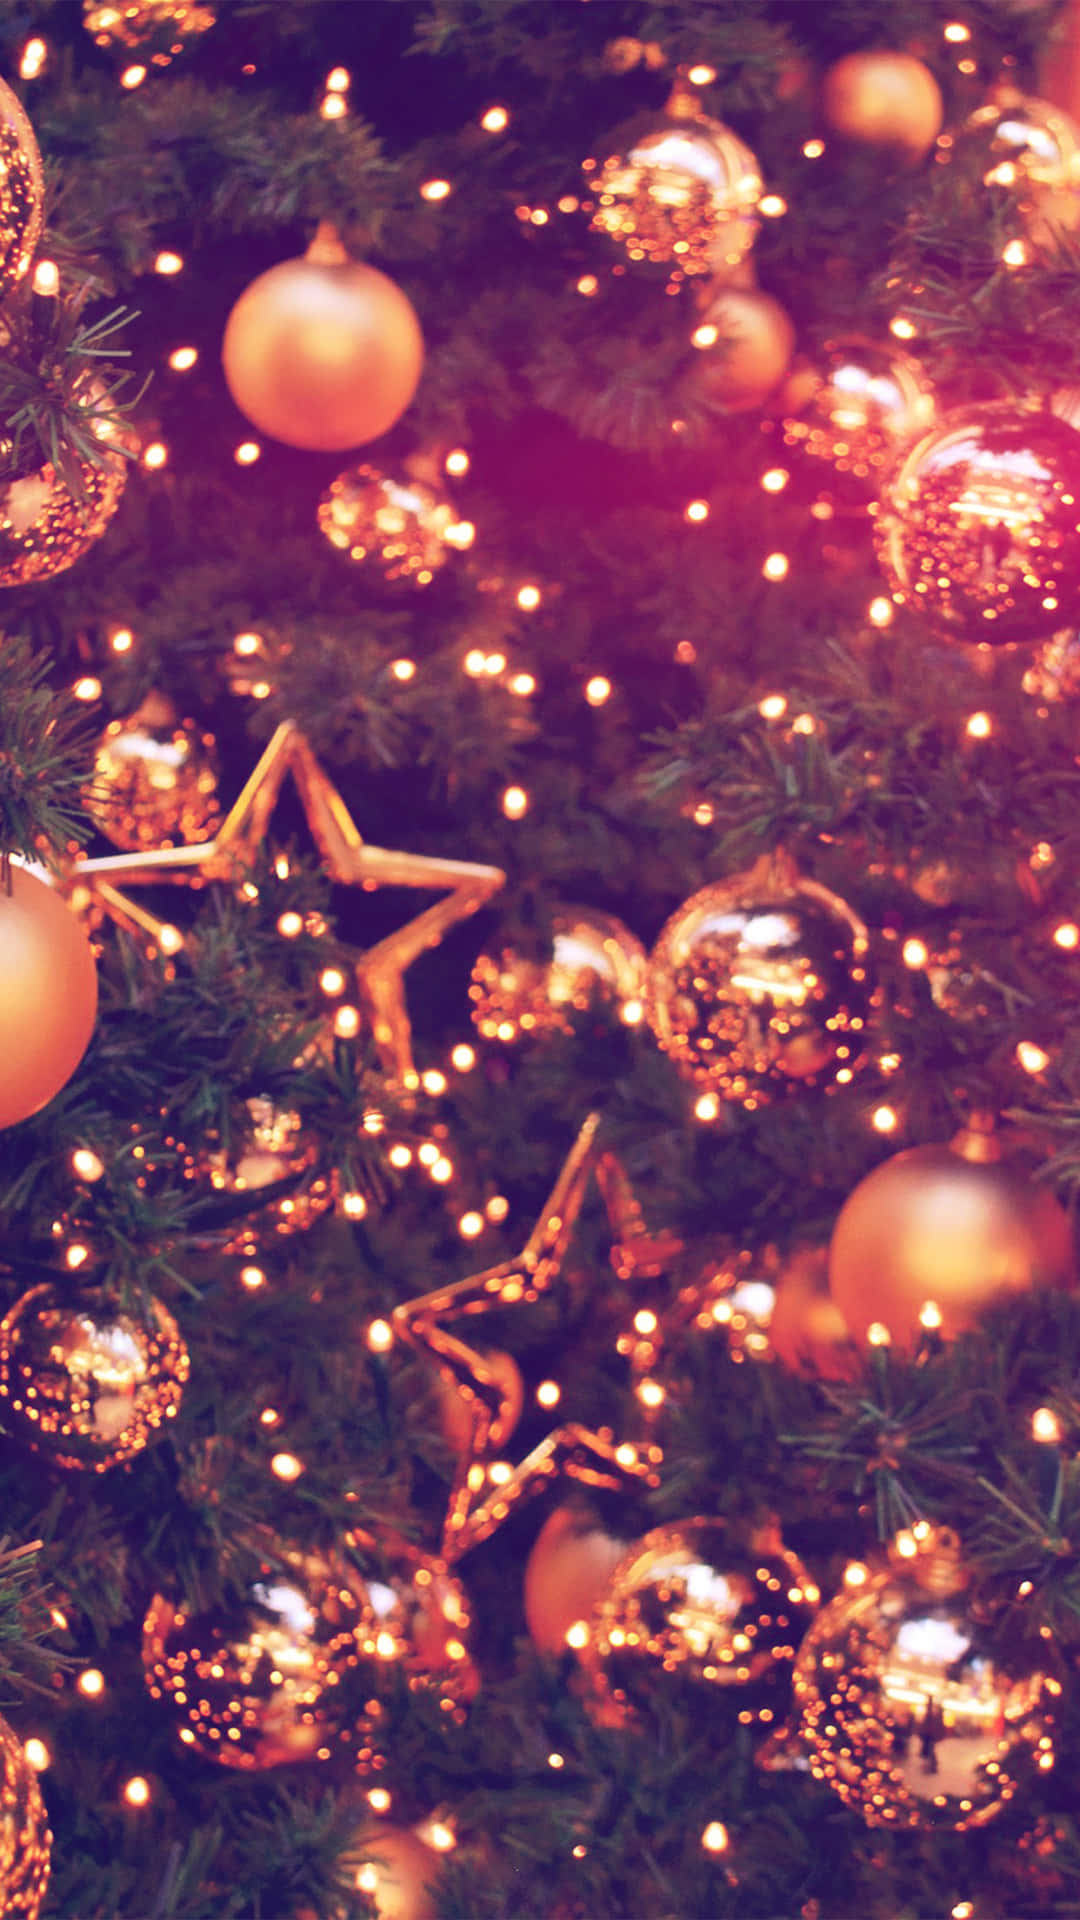 A Christmas Tree With Gold Ornaments And Stars Wallpaper